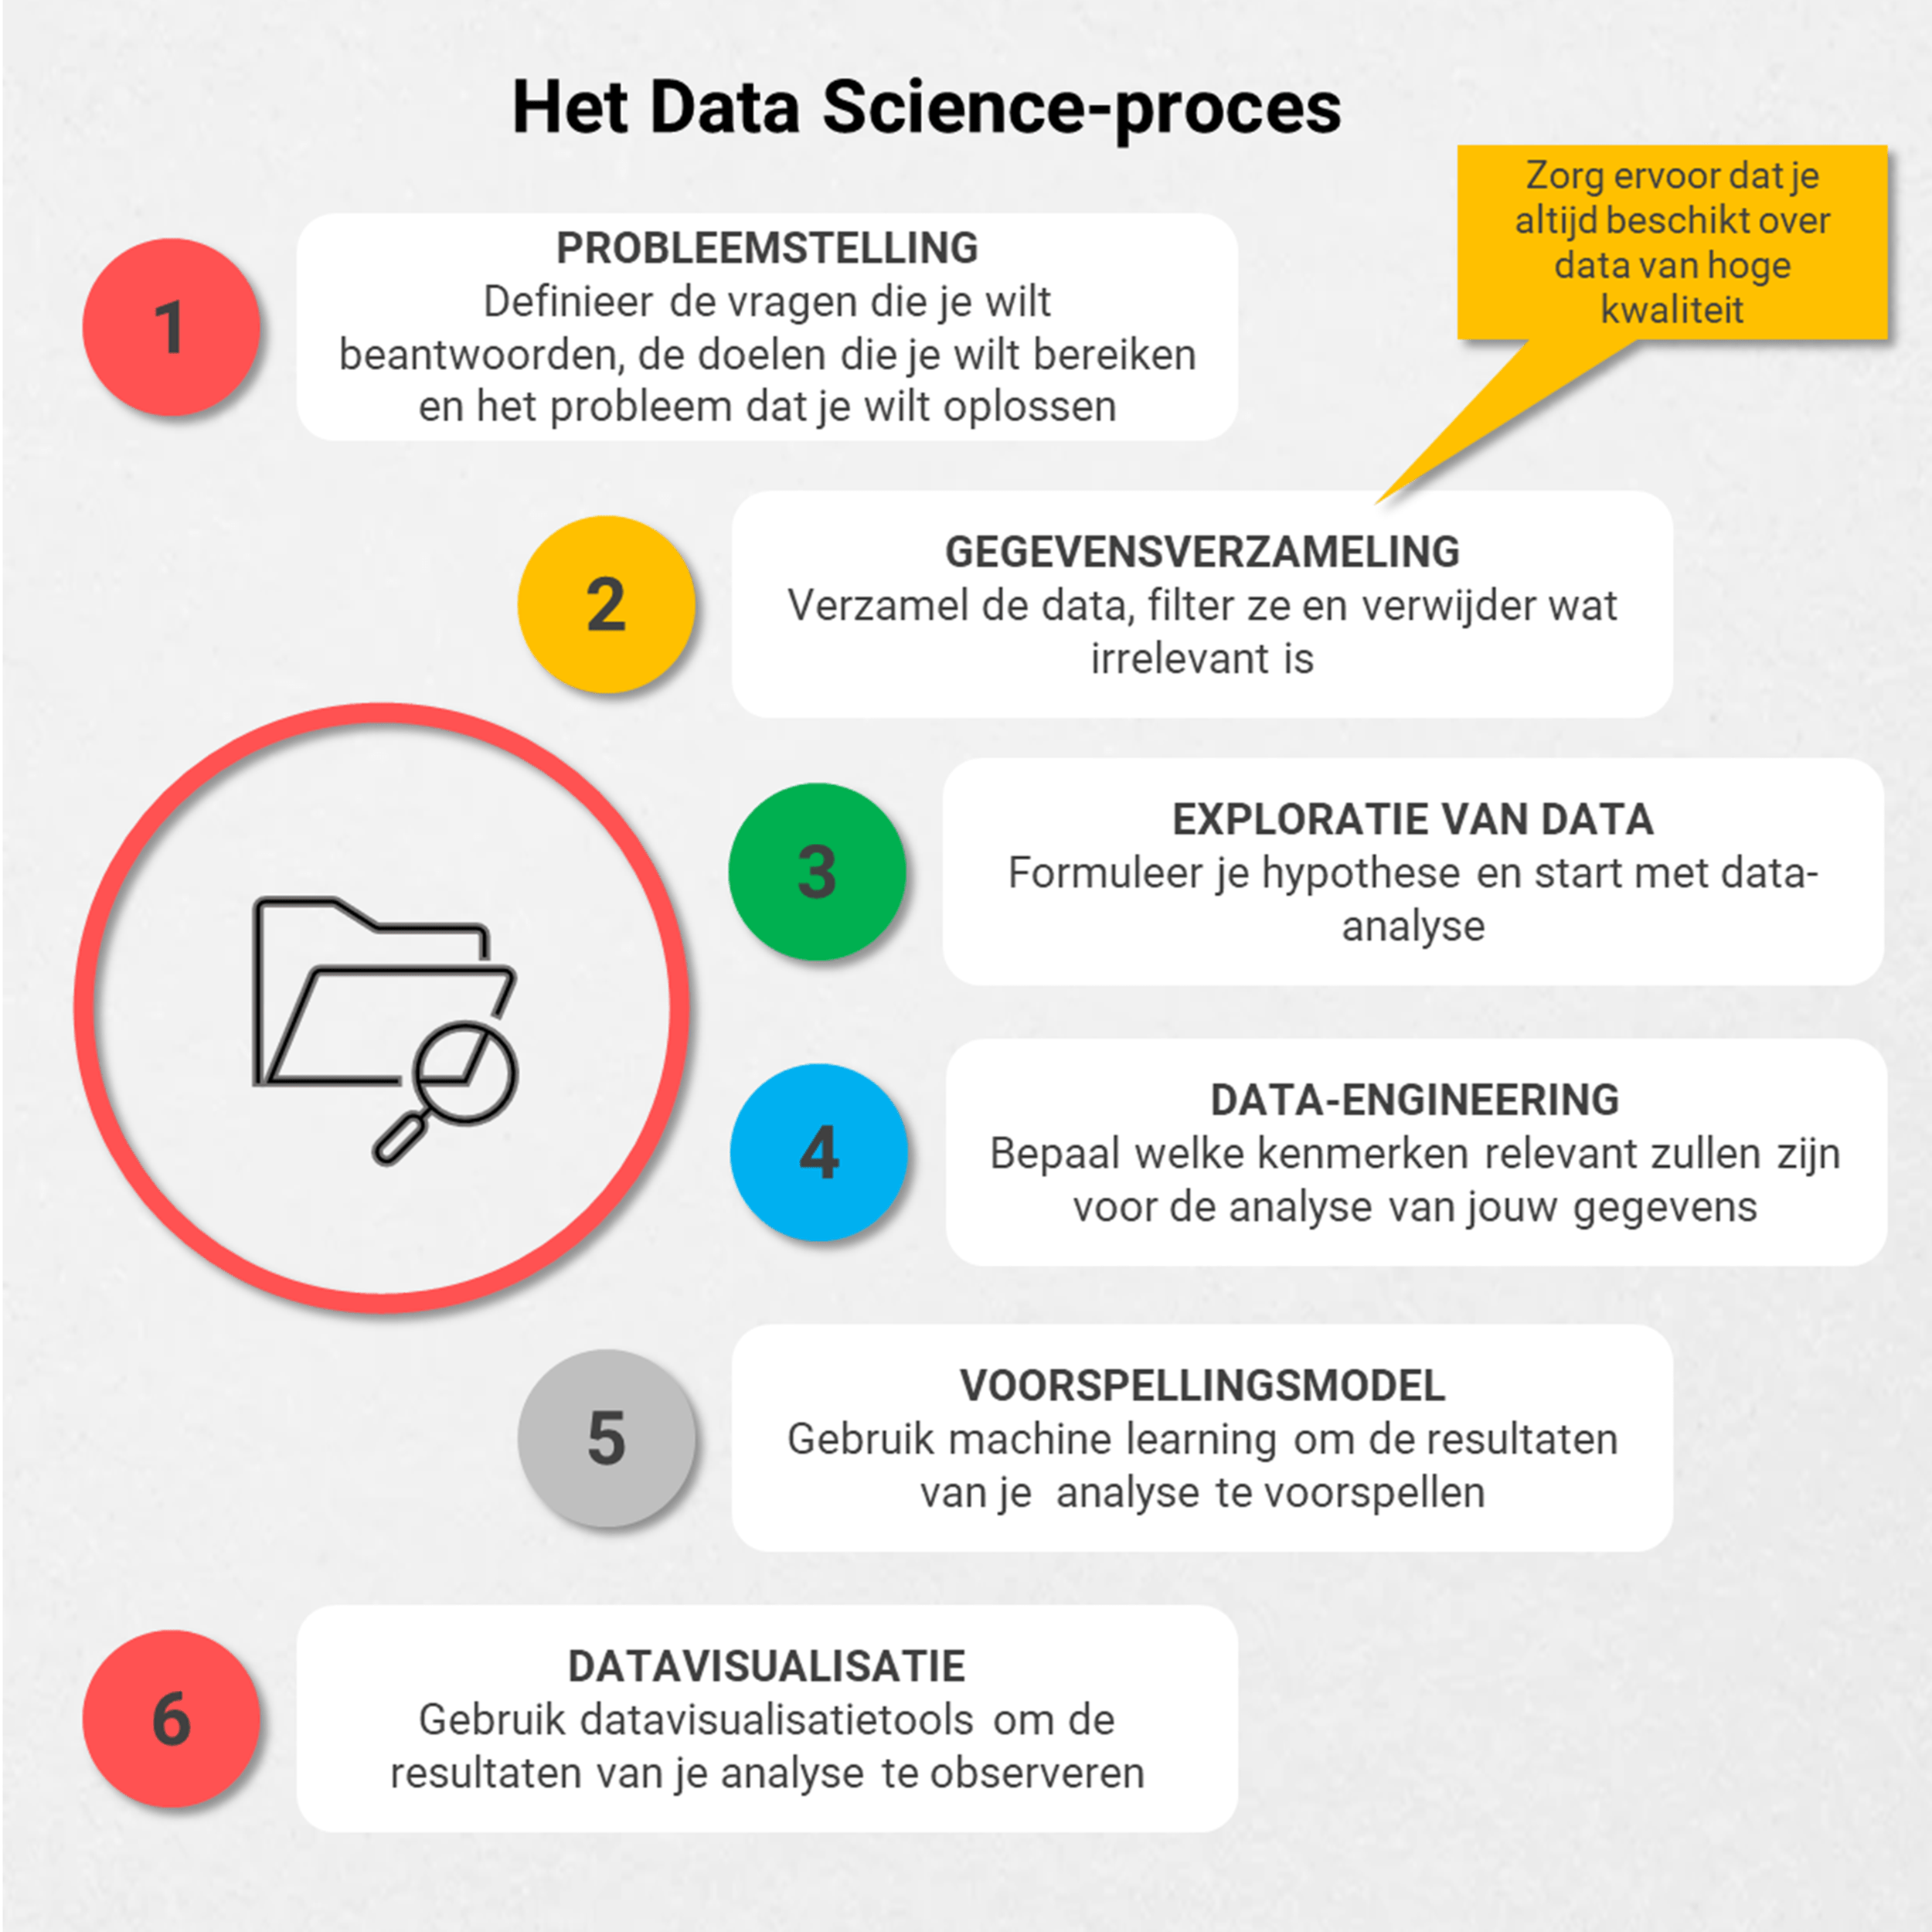 Data Science proces